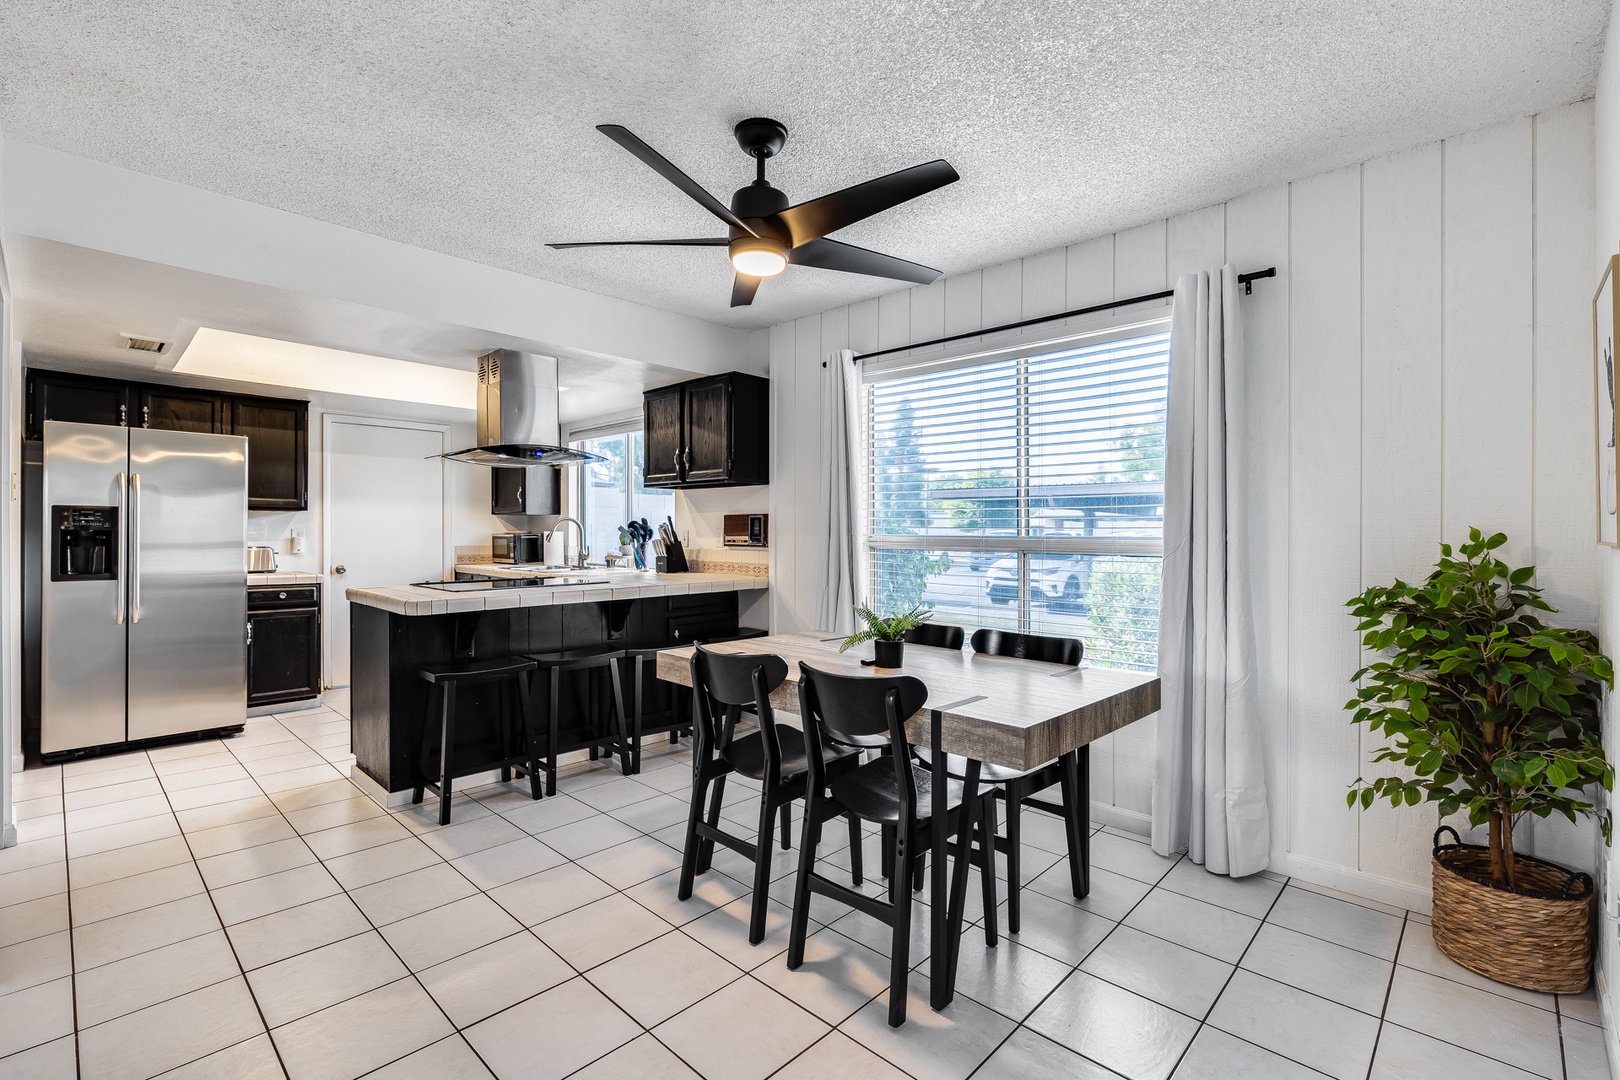 Glendale Vacation Rentals, Condo at the Bell Air - The kitchen flows seamlessly into the dining area